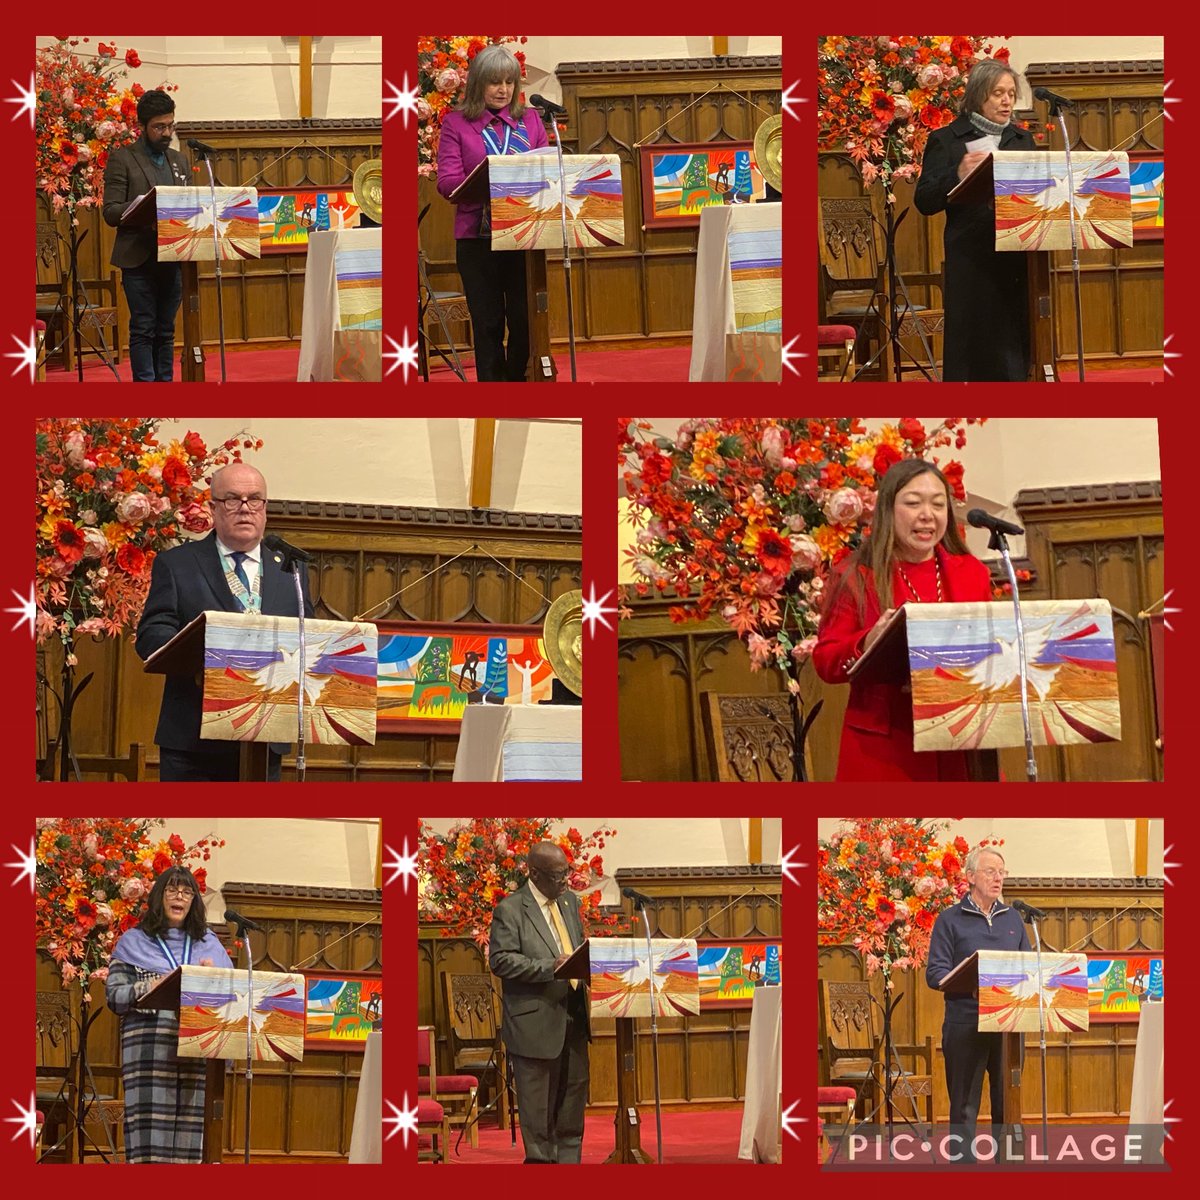 DG Brian Coleman Rotary District 1130 London UK Carol Services held at Finchley Methodist Church today. Service conducted by our Rtn The Revd Dr Martin Wellings. ⛪️⛪️ And the gifts of new toys or money for Action of Children in London. 🥳🥳